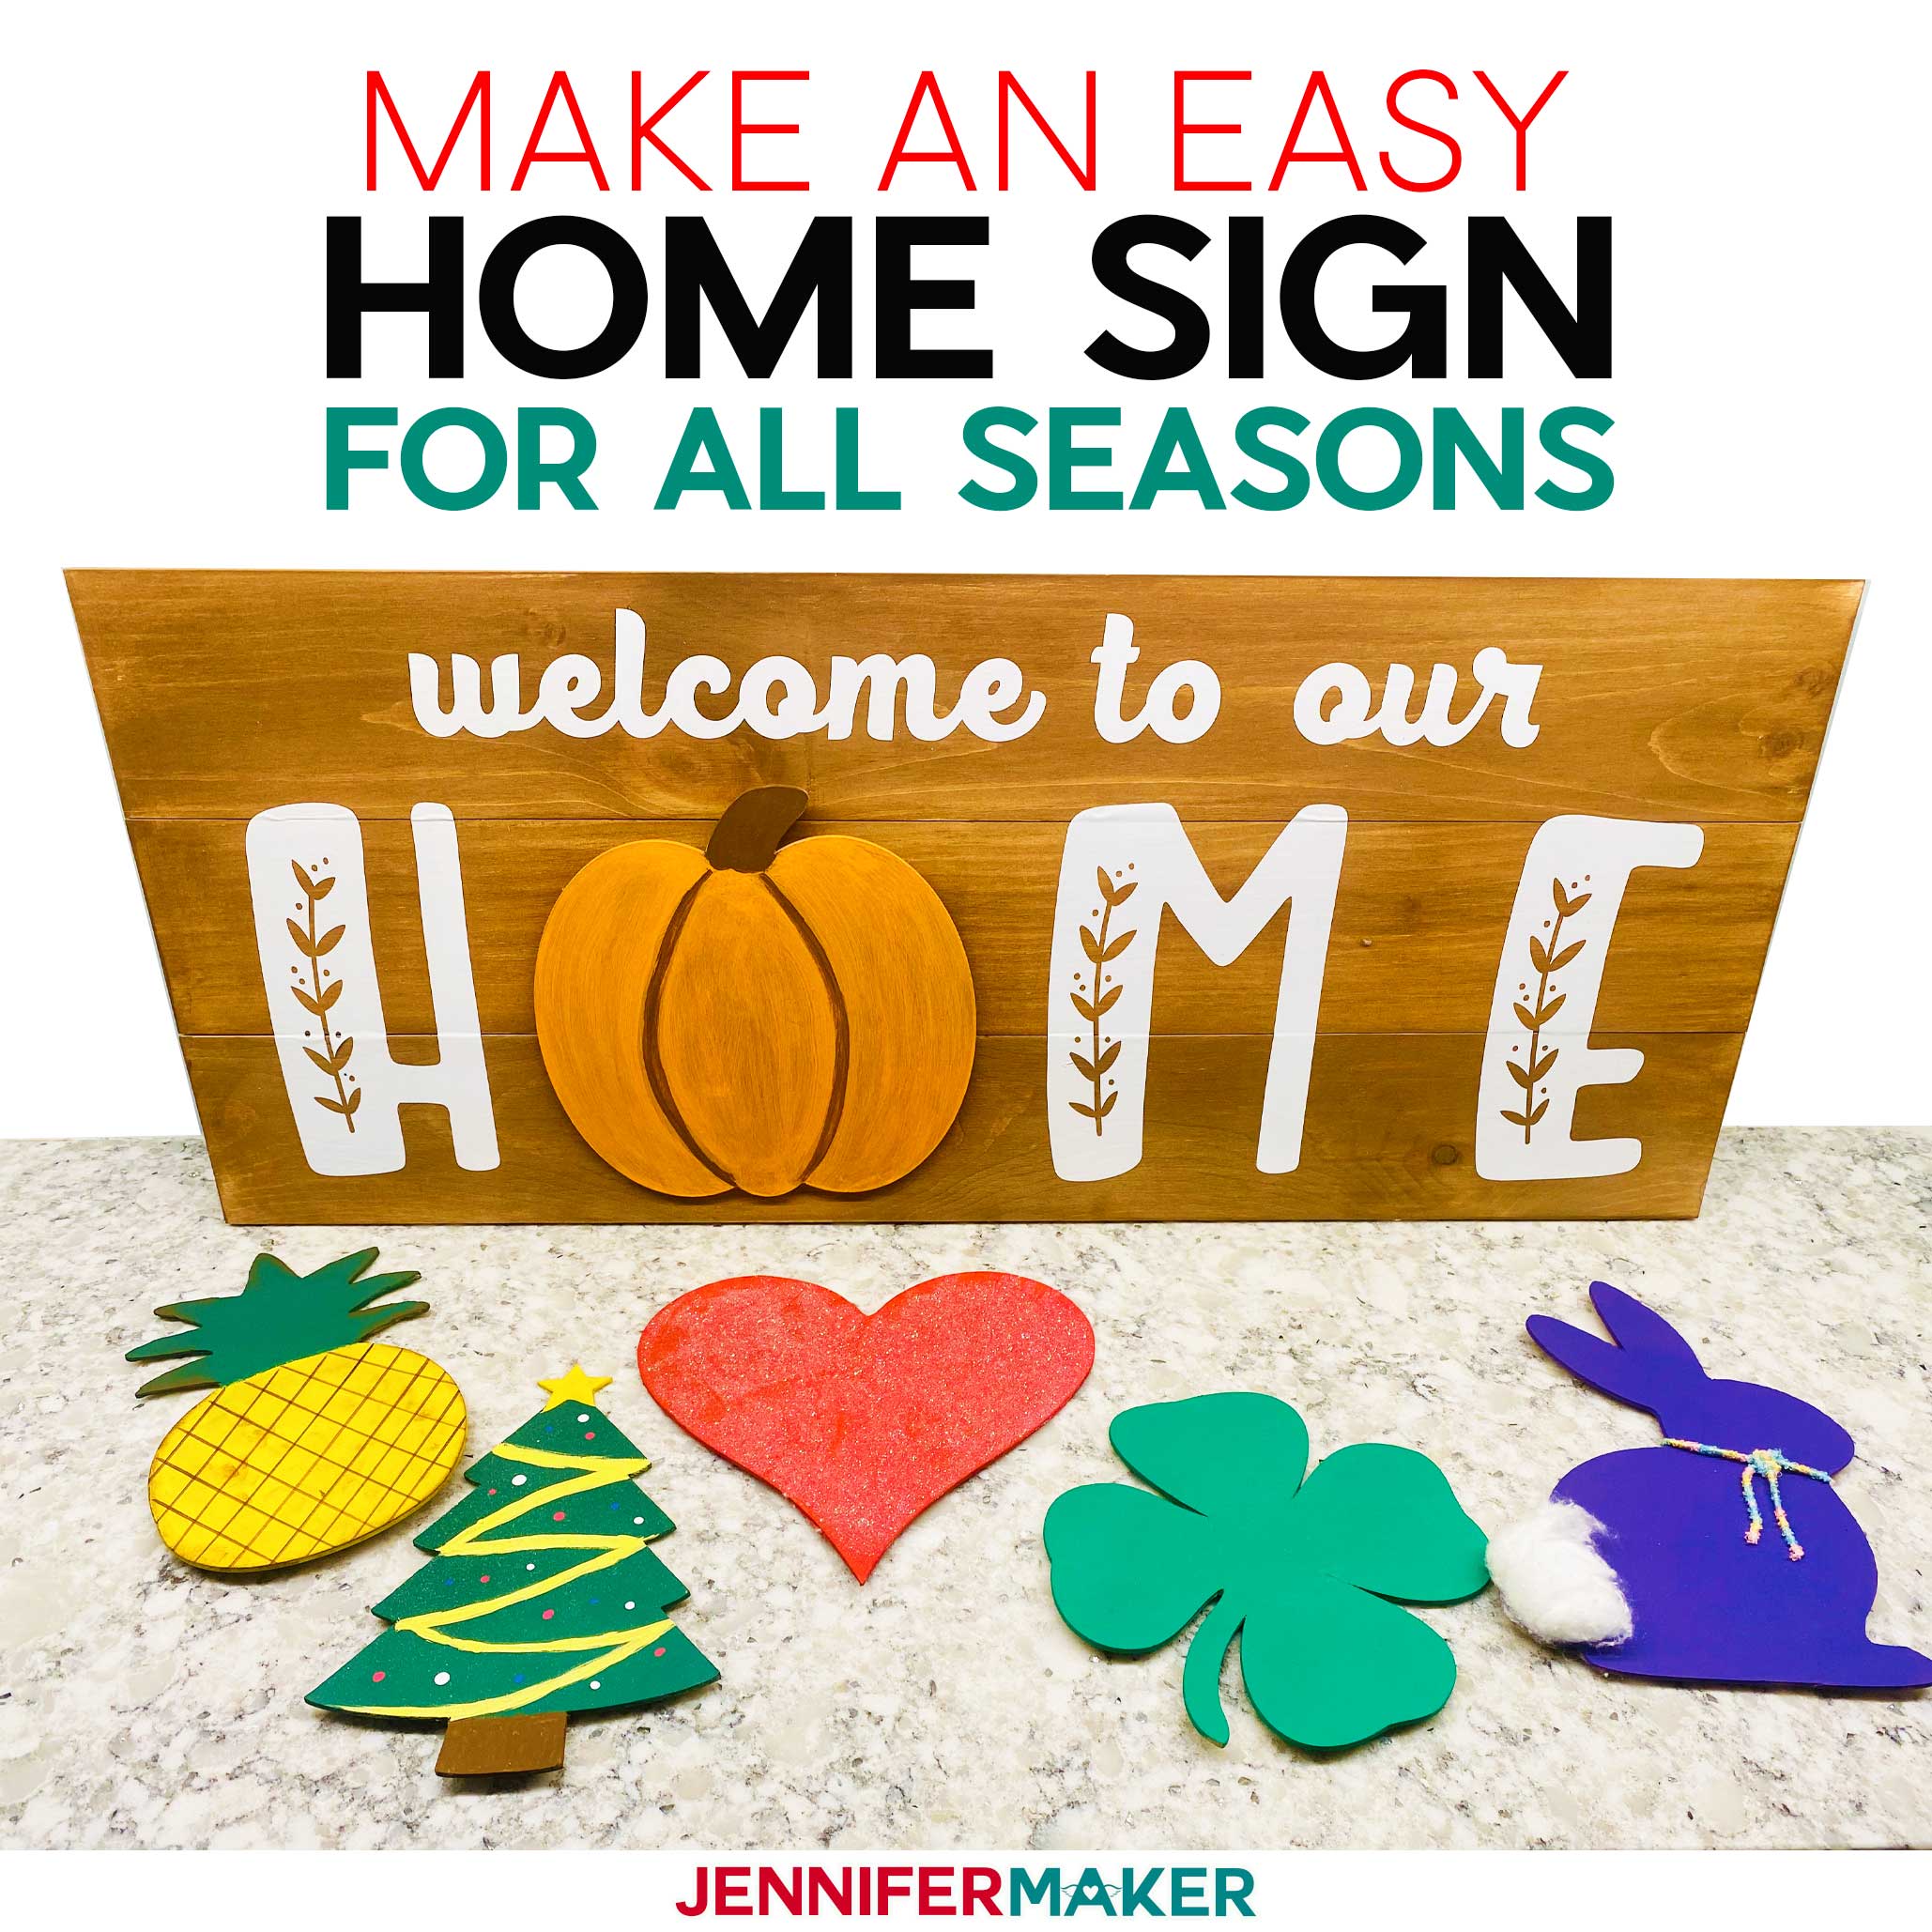 DIY Welcome Sign with Seasonal Decorations - Pumpkin, Pineapple, Tree, Heart, Clover, and Bunny